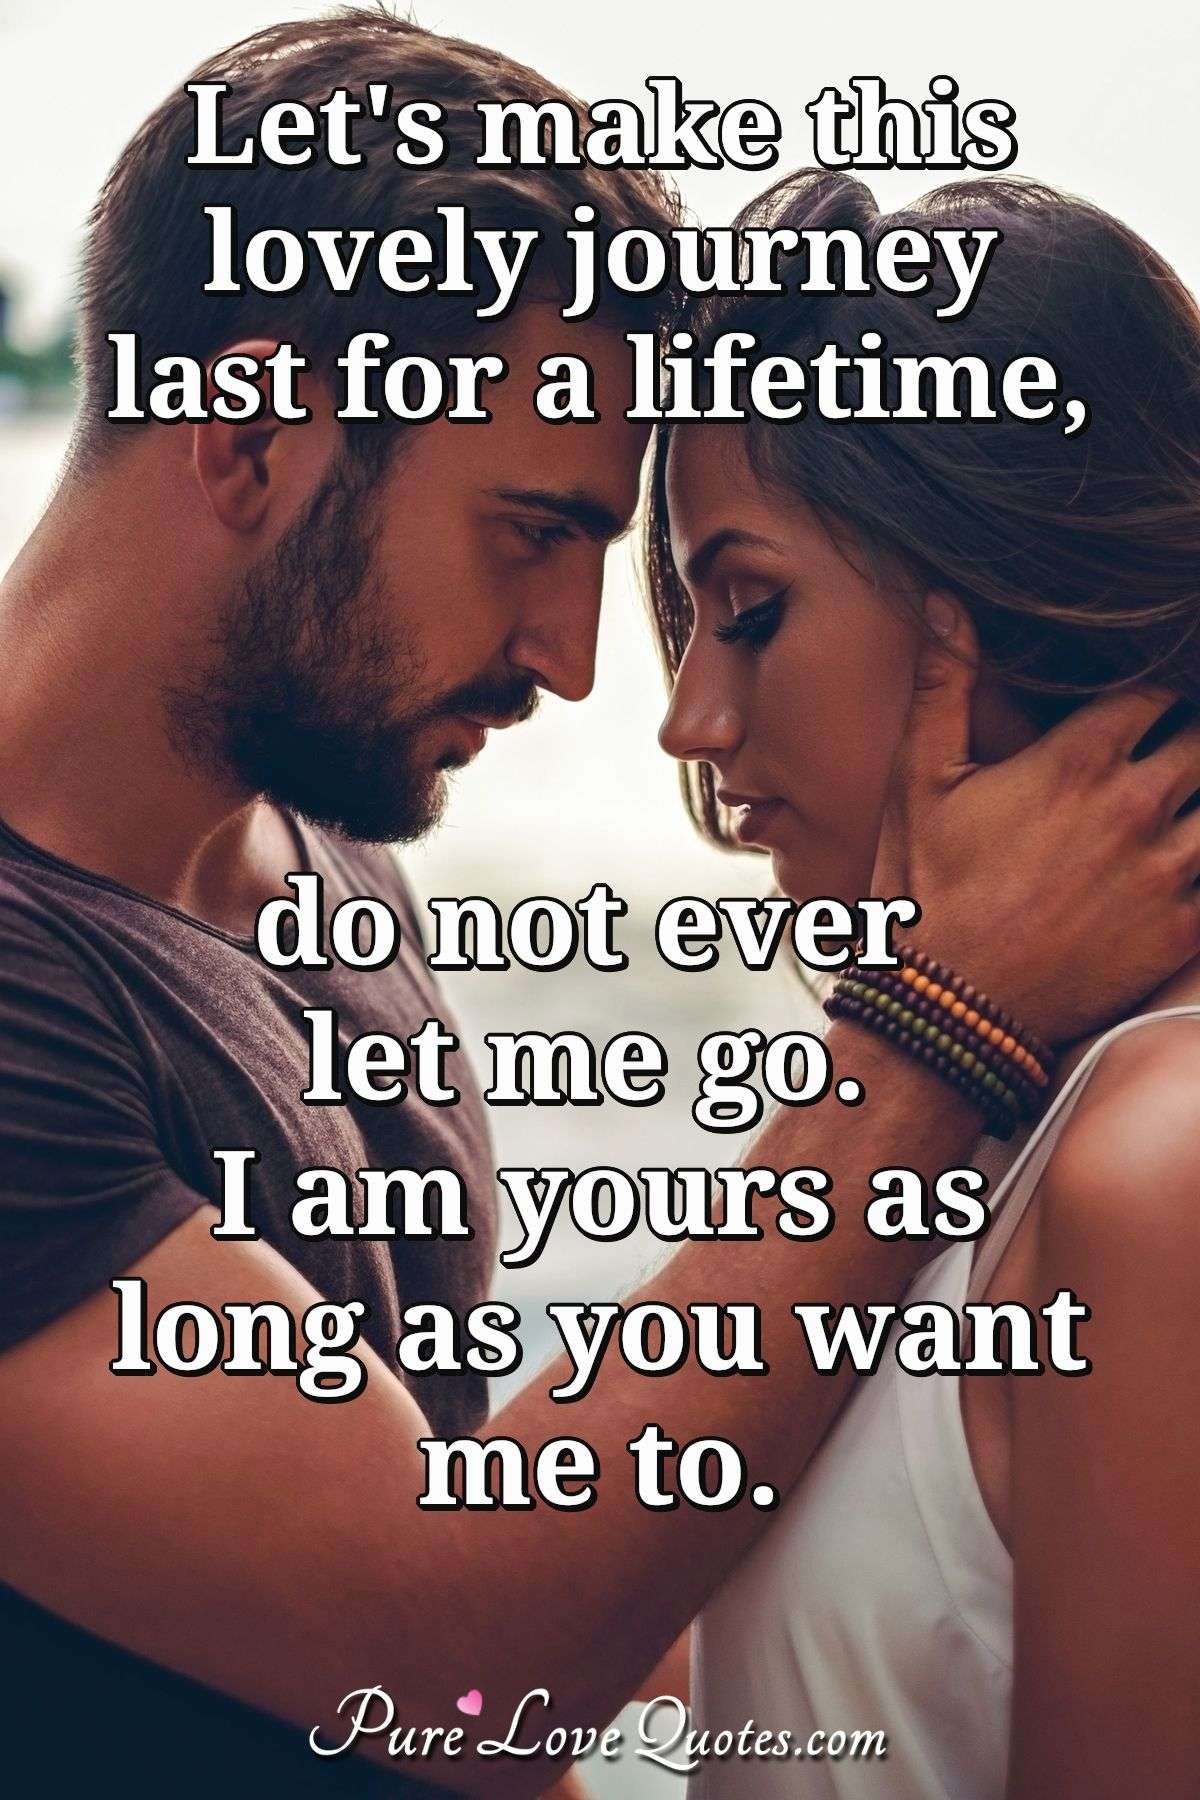 Let's make this lovely journey last for a lifetime, do not ever let me go. I am yours as long as you want me to. - Anonymous